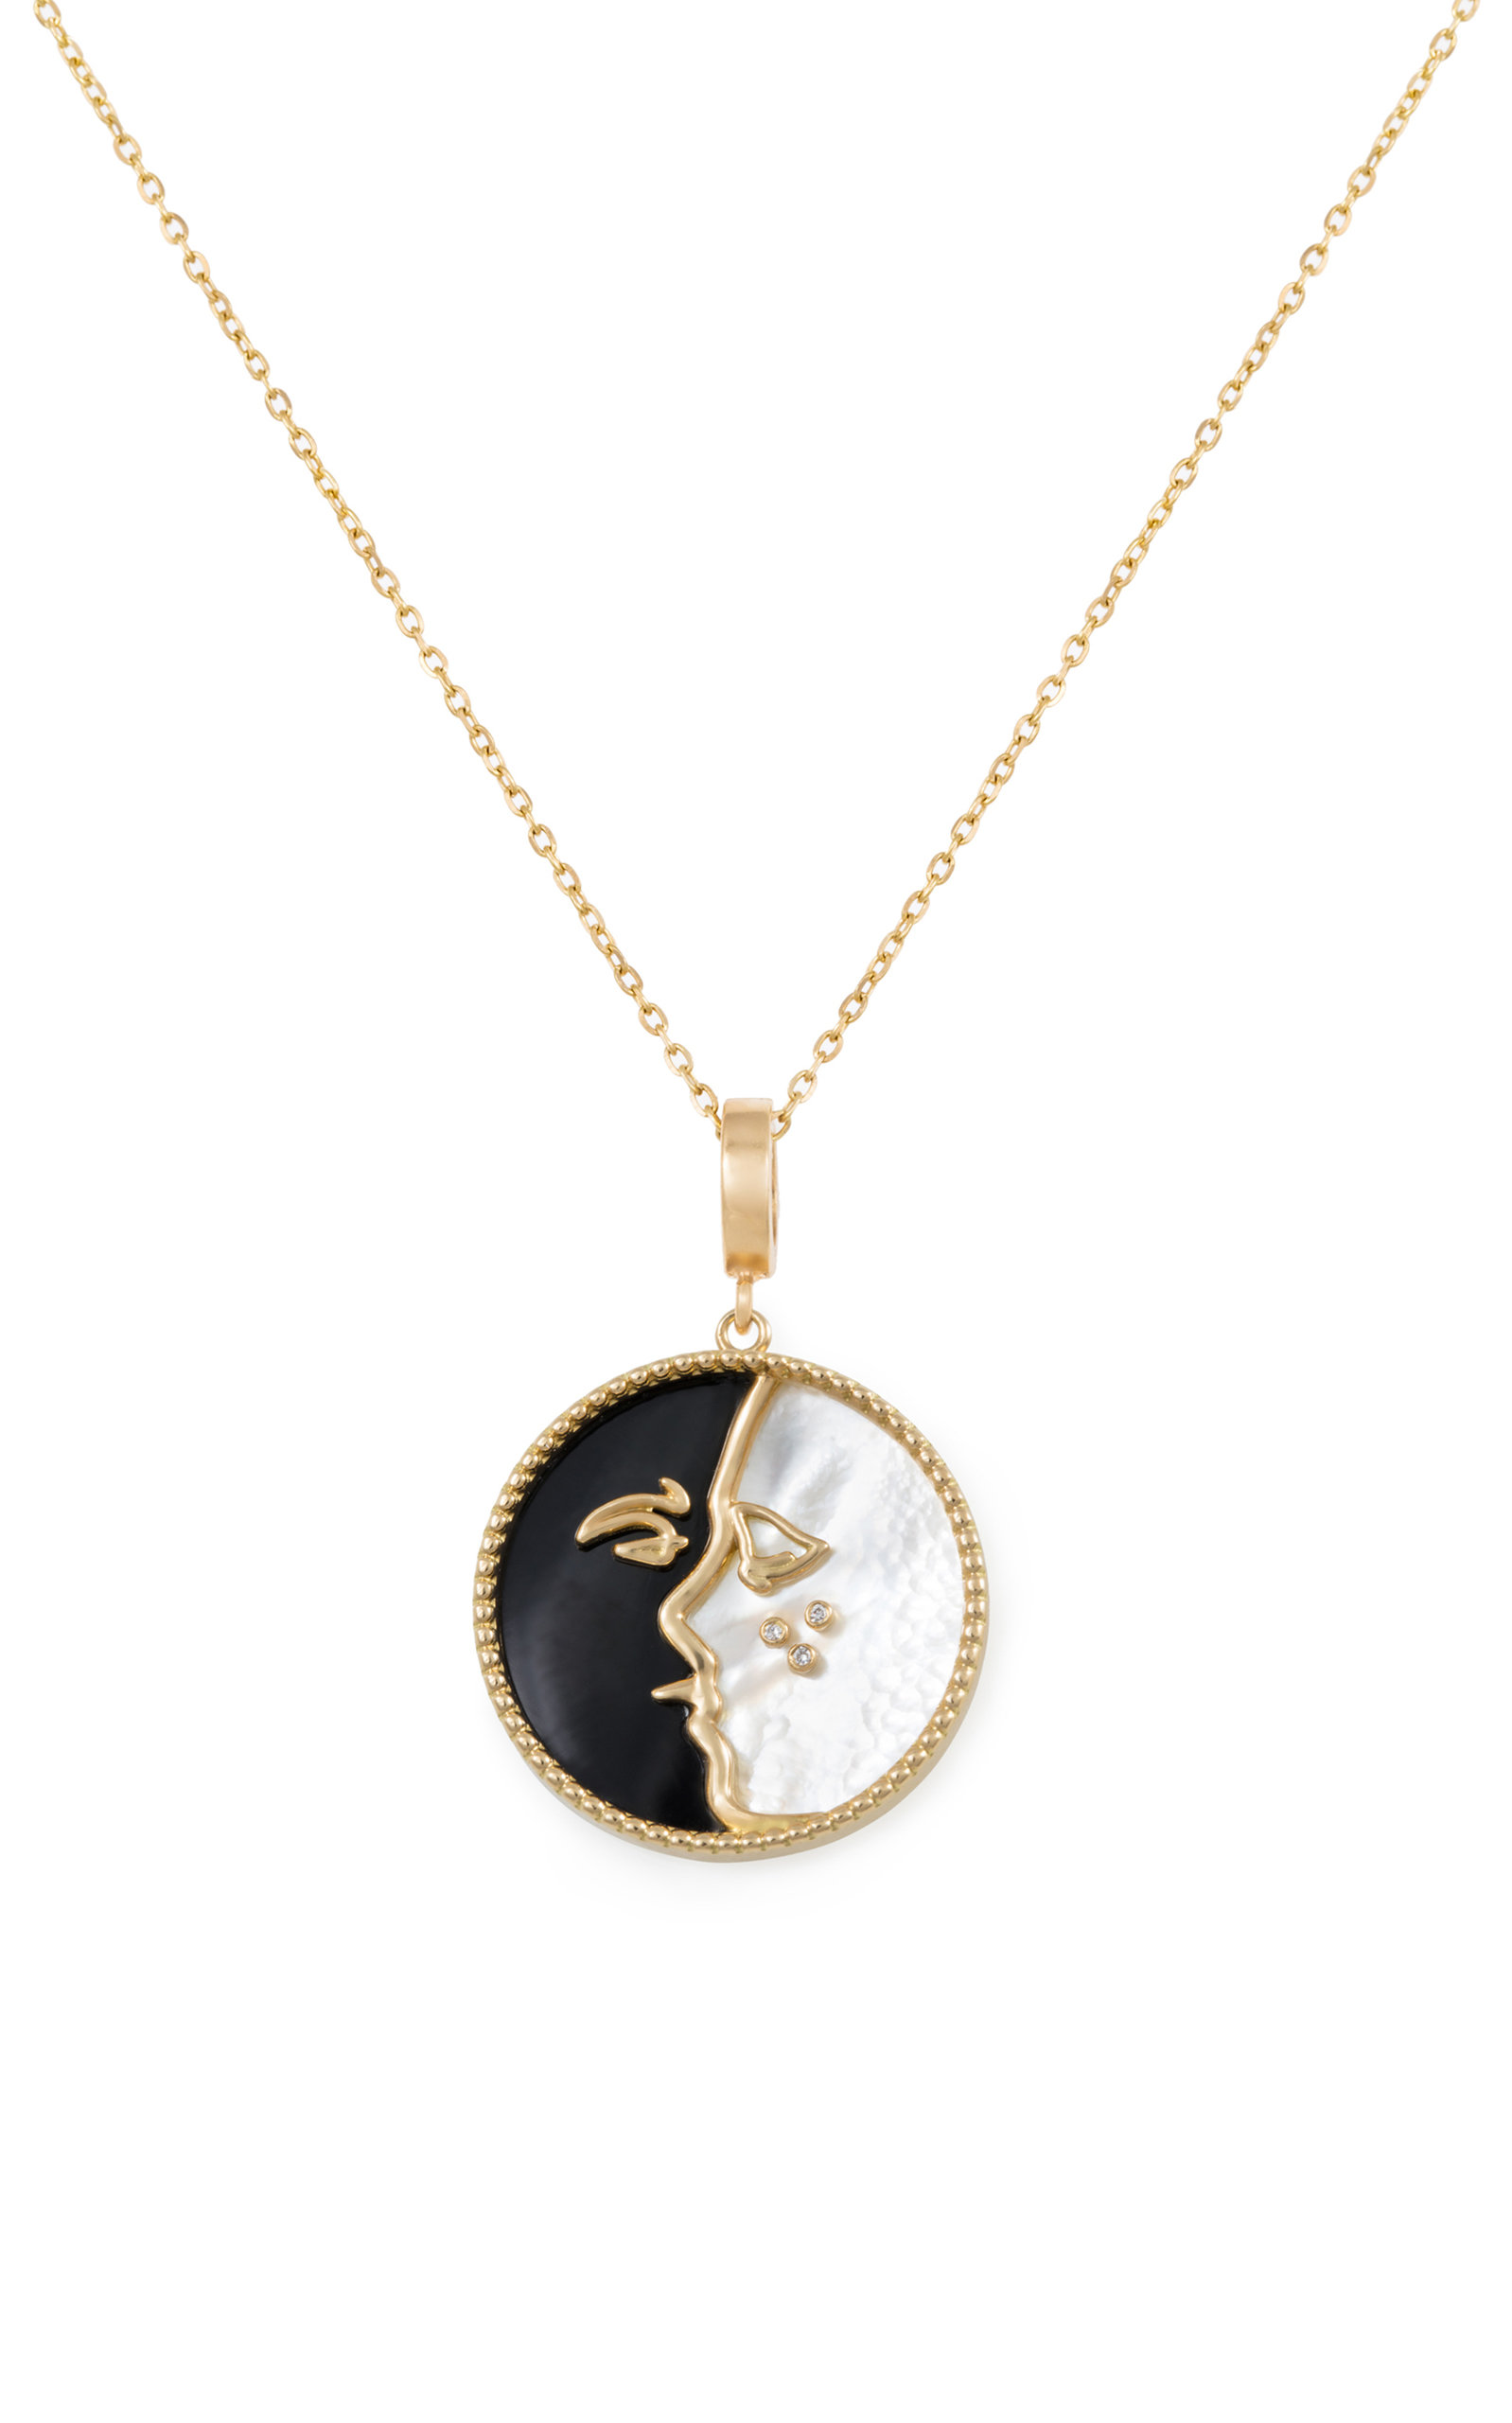 The Kiss 18K Yellow Gold Pendant Necklace